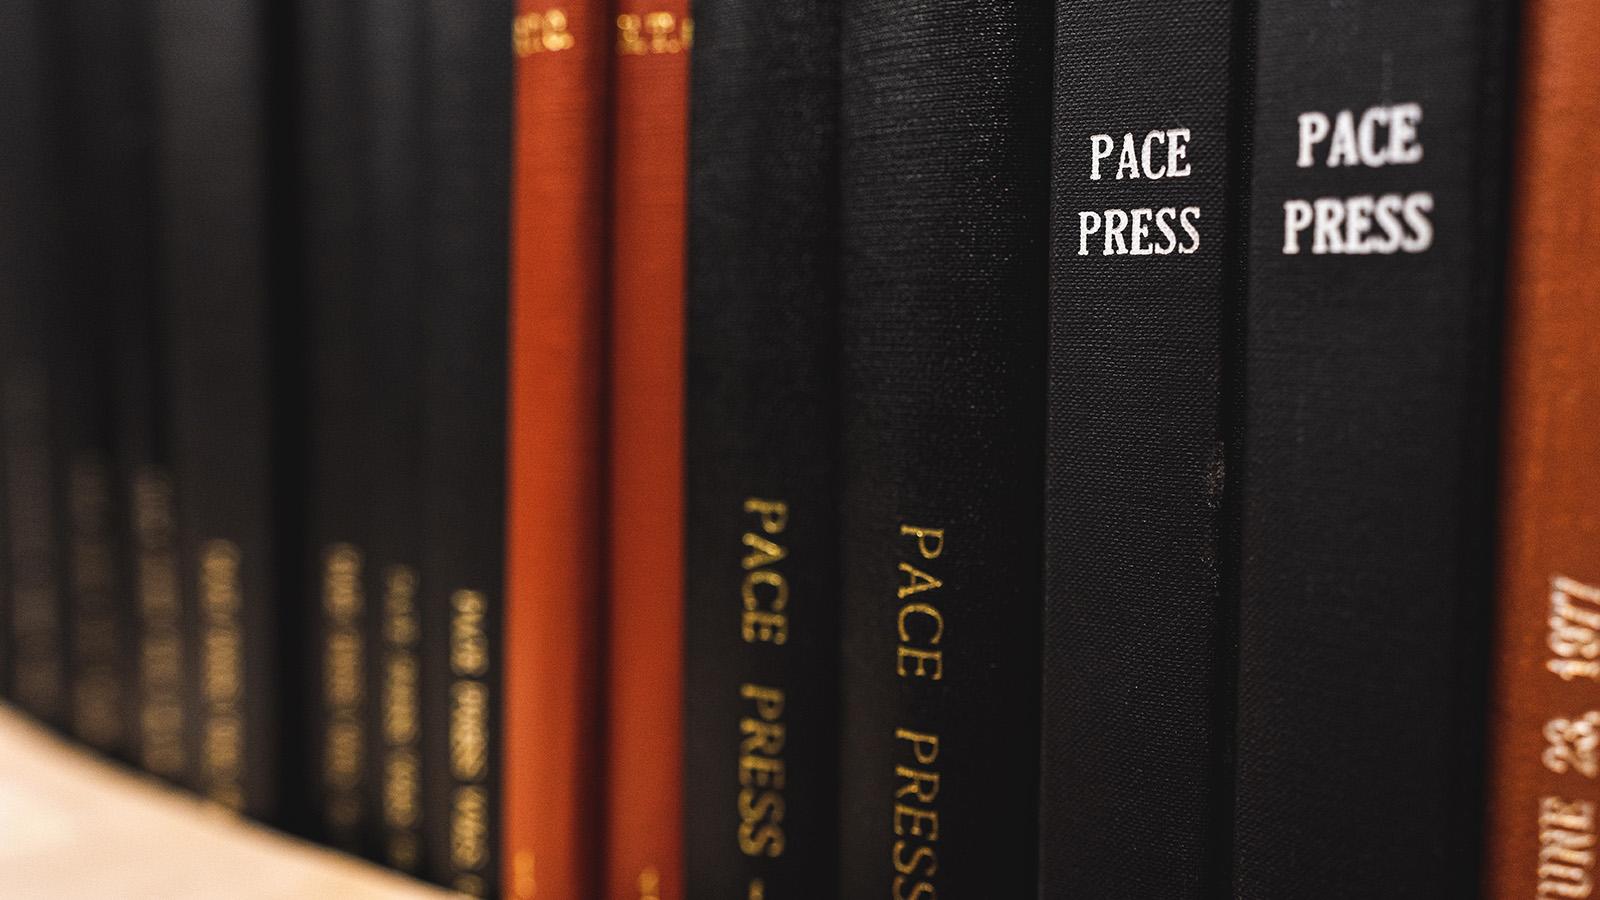 Volumes of Pace Press